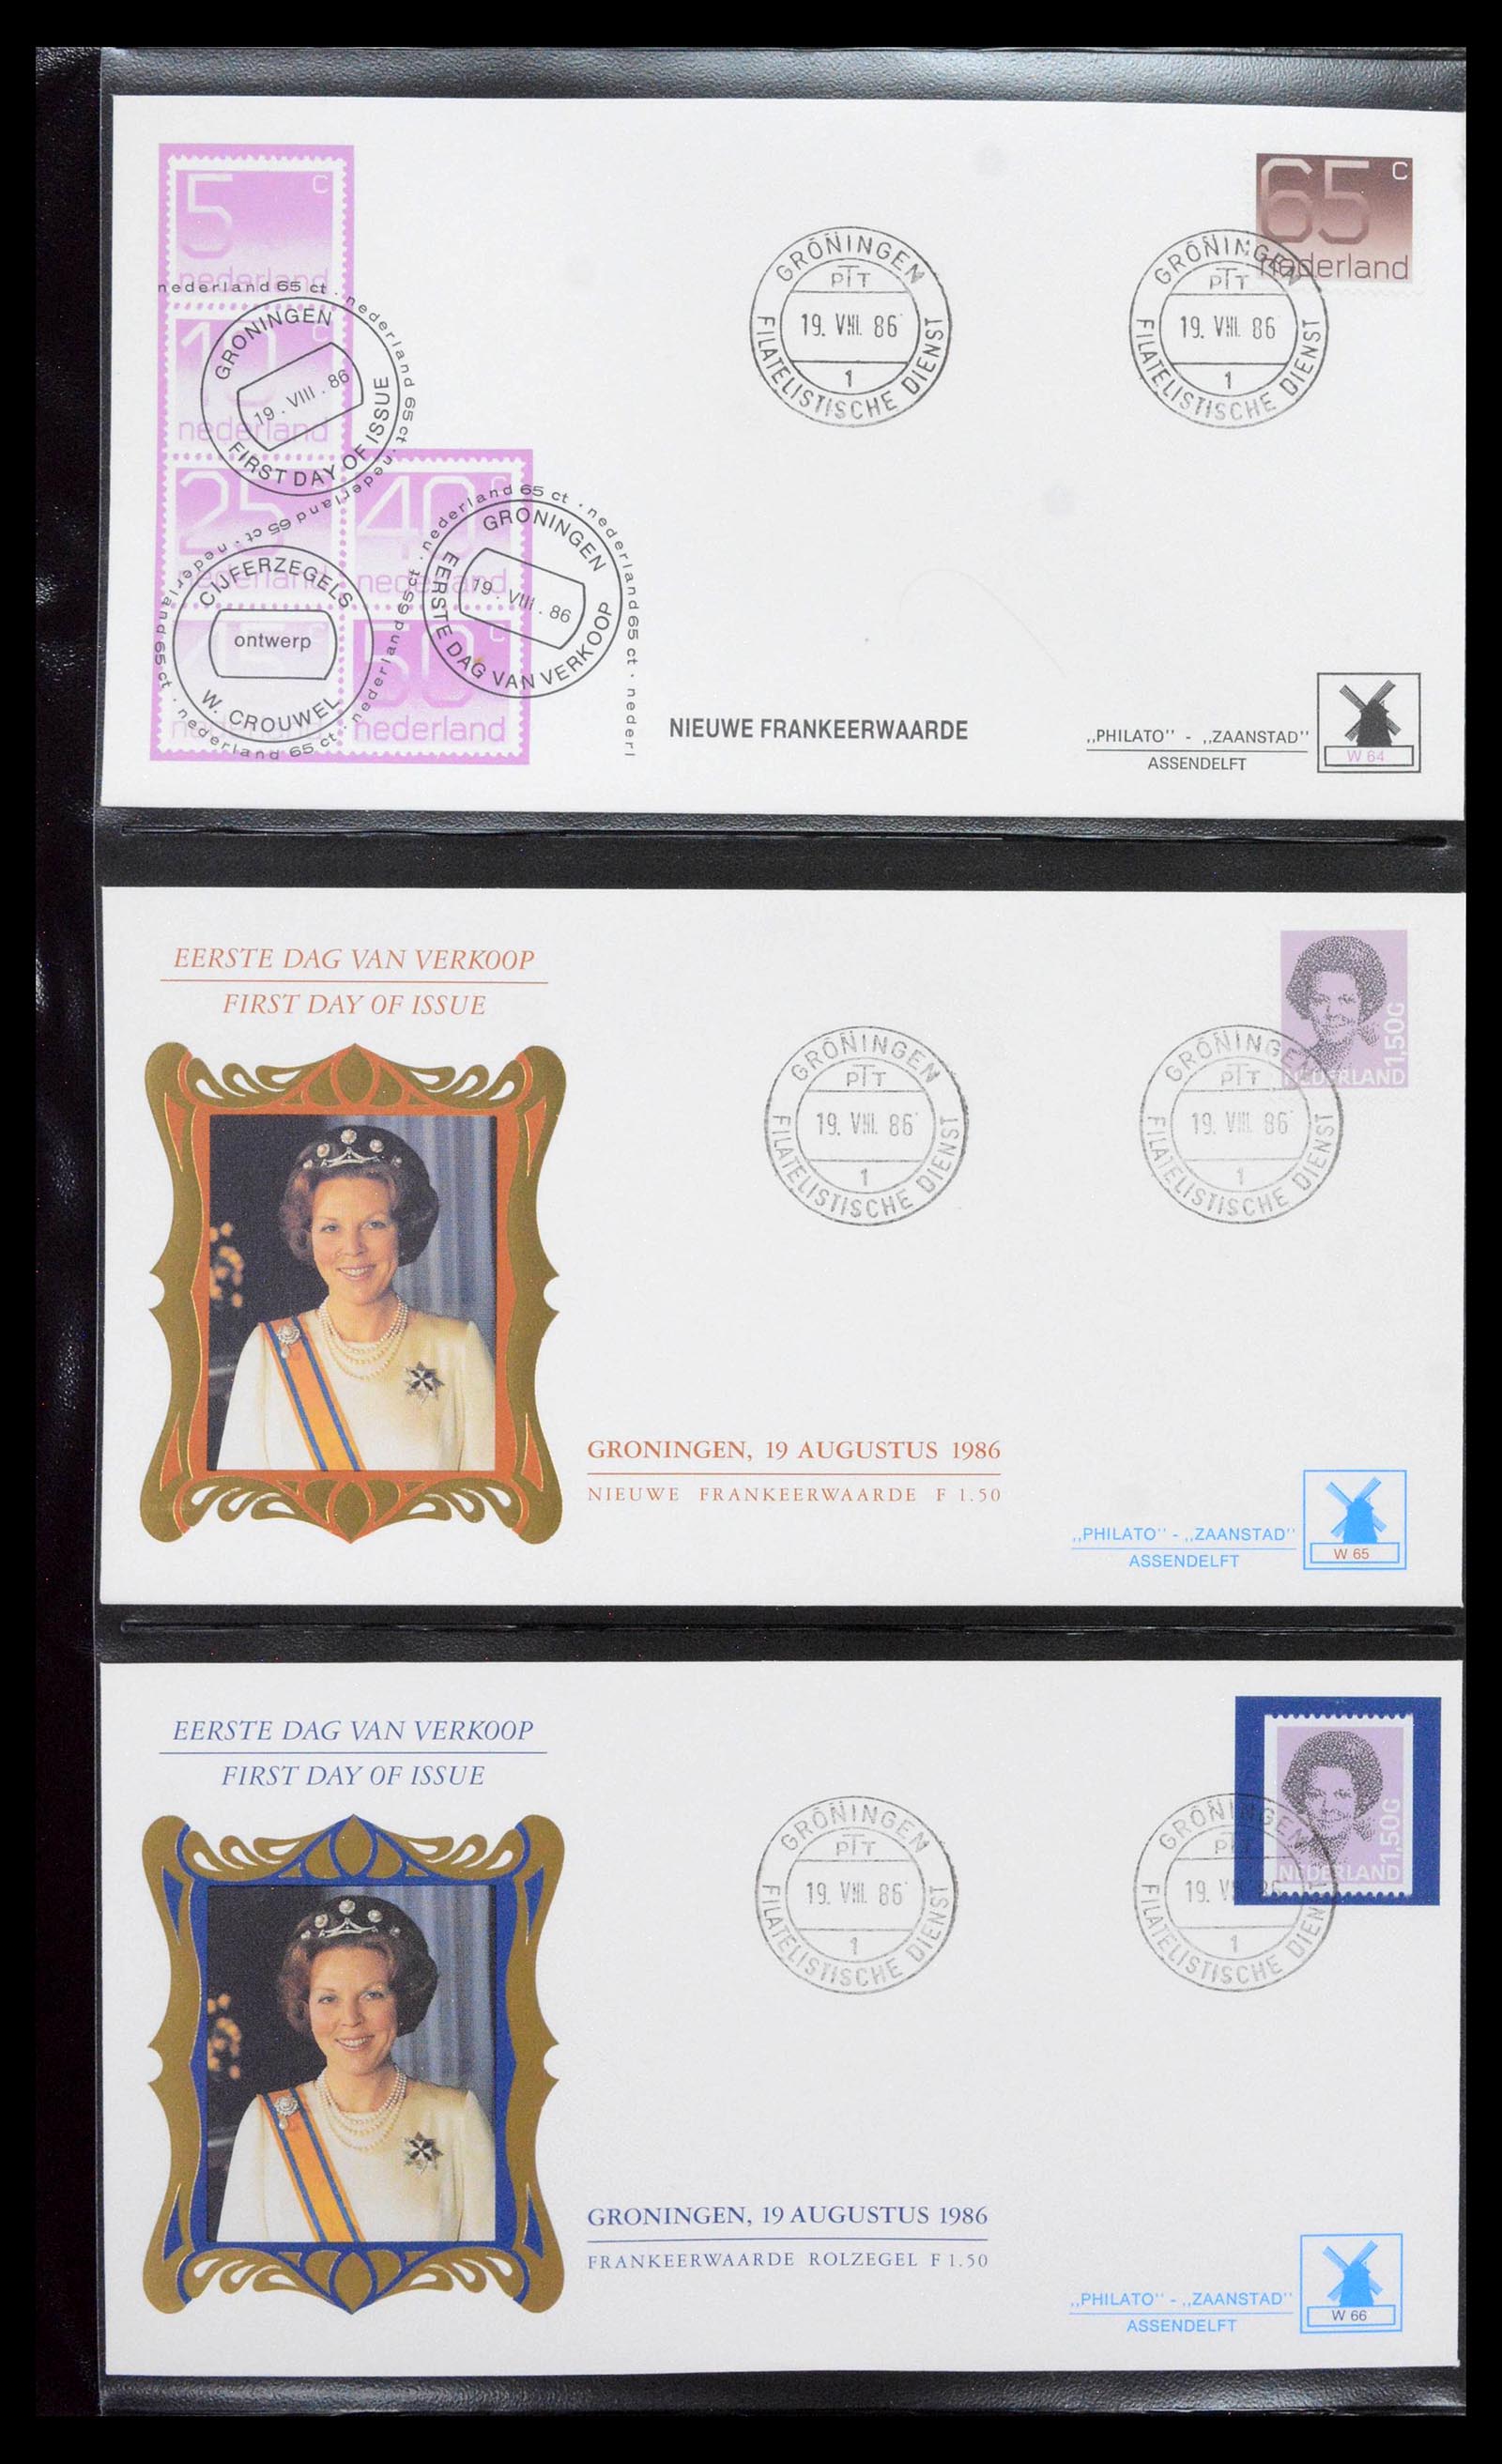 38559 0023 - Stamp collection 38559 Netherlands special first day covers.